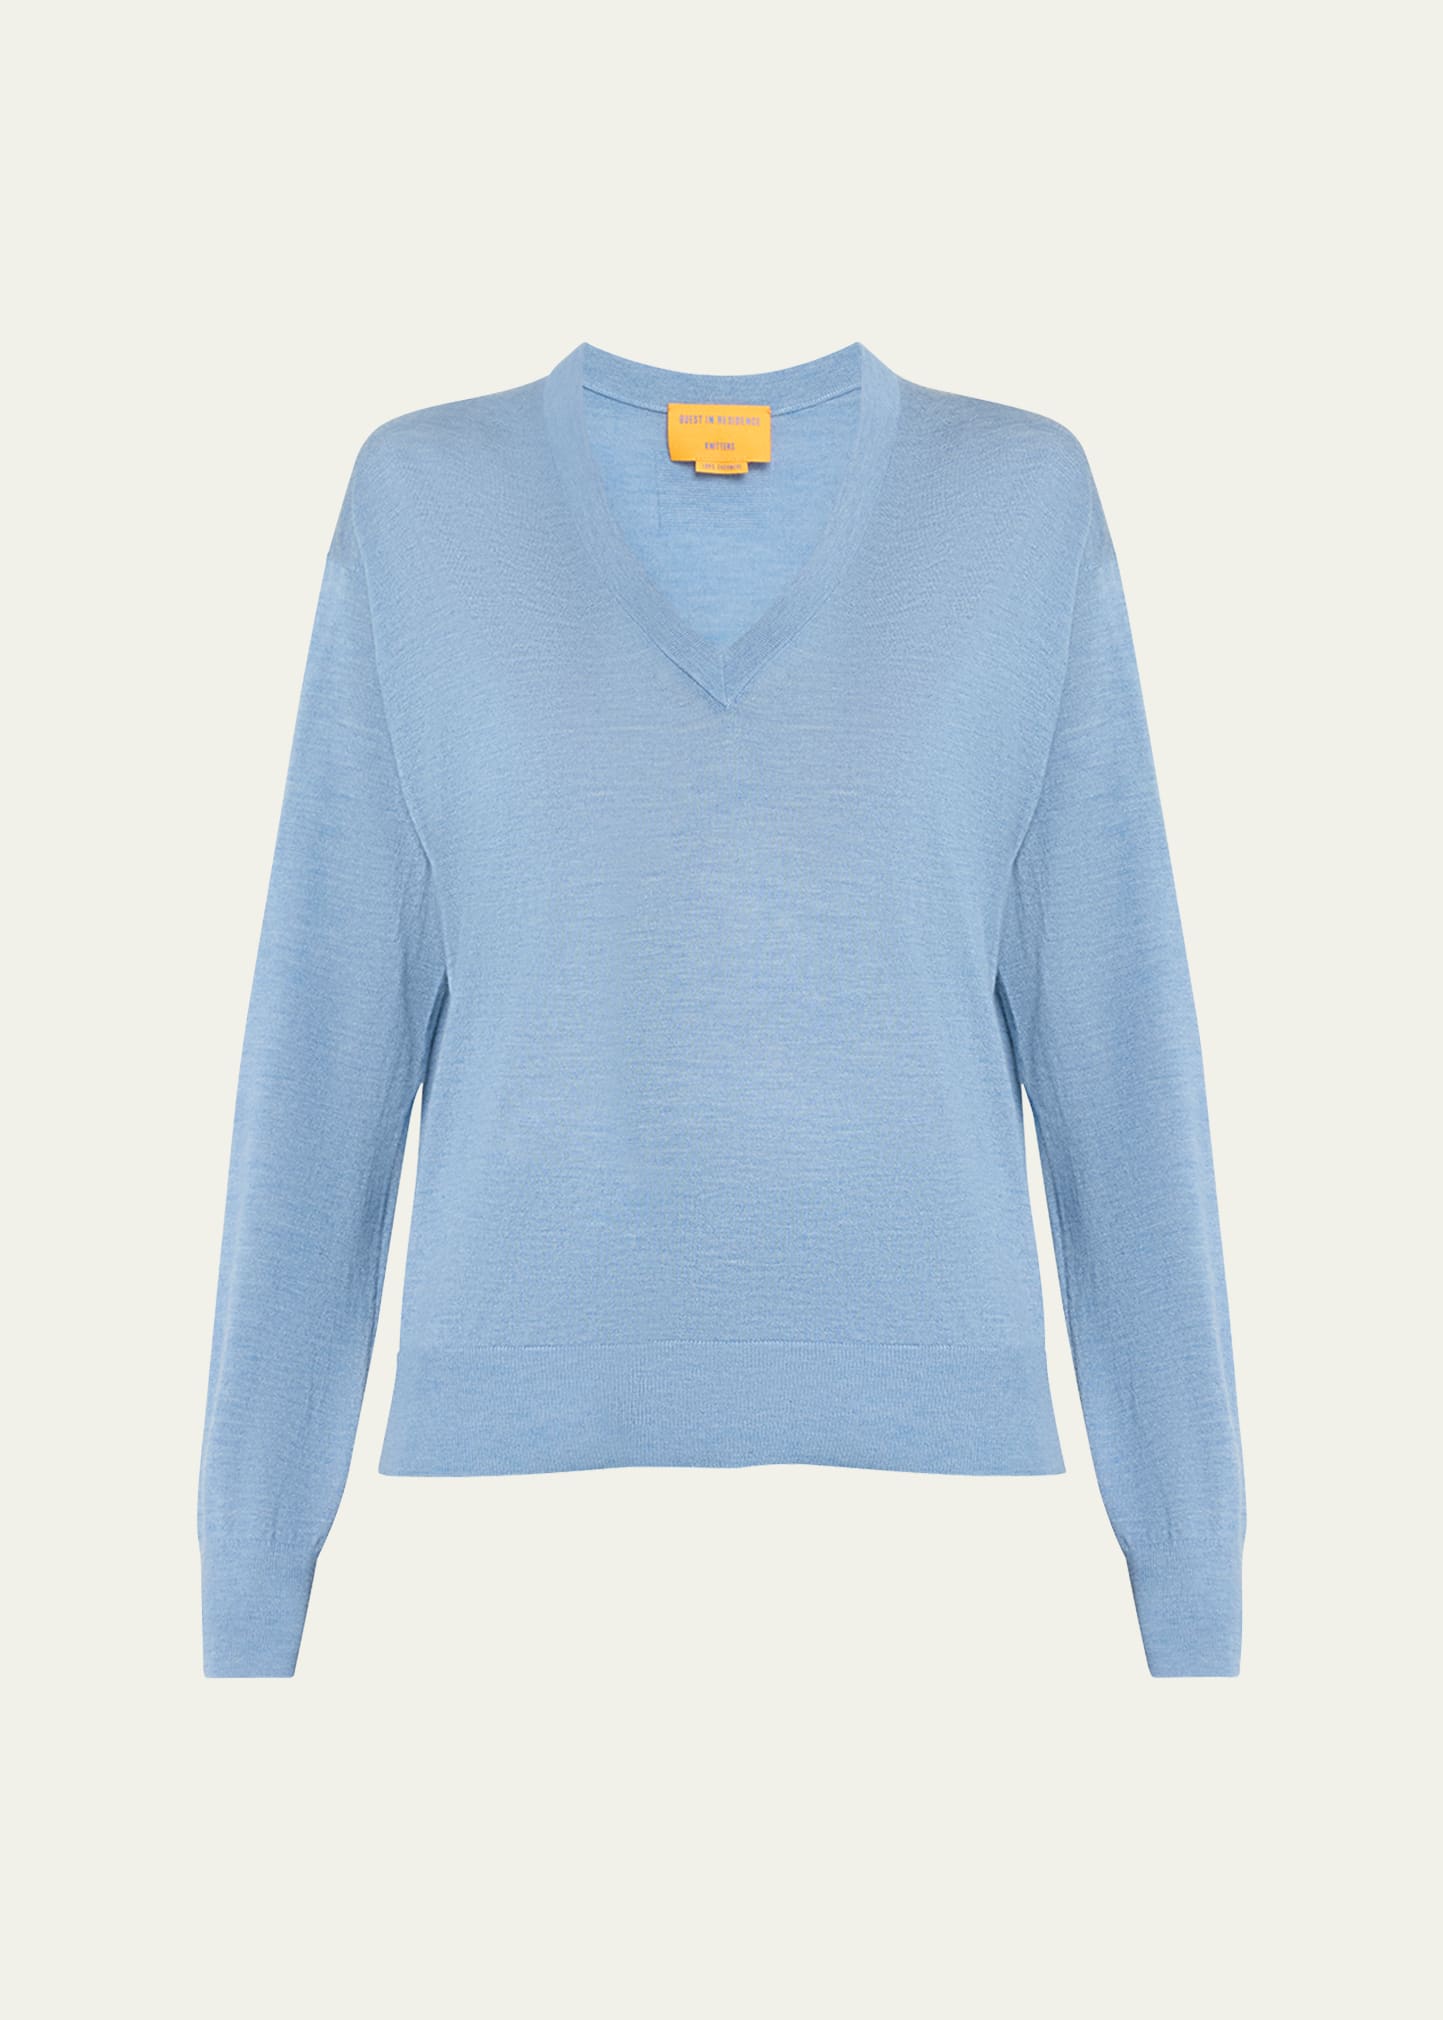 The Airy V-Neck Cashmere Sweater